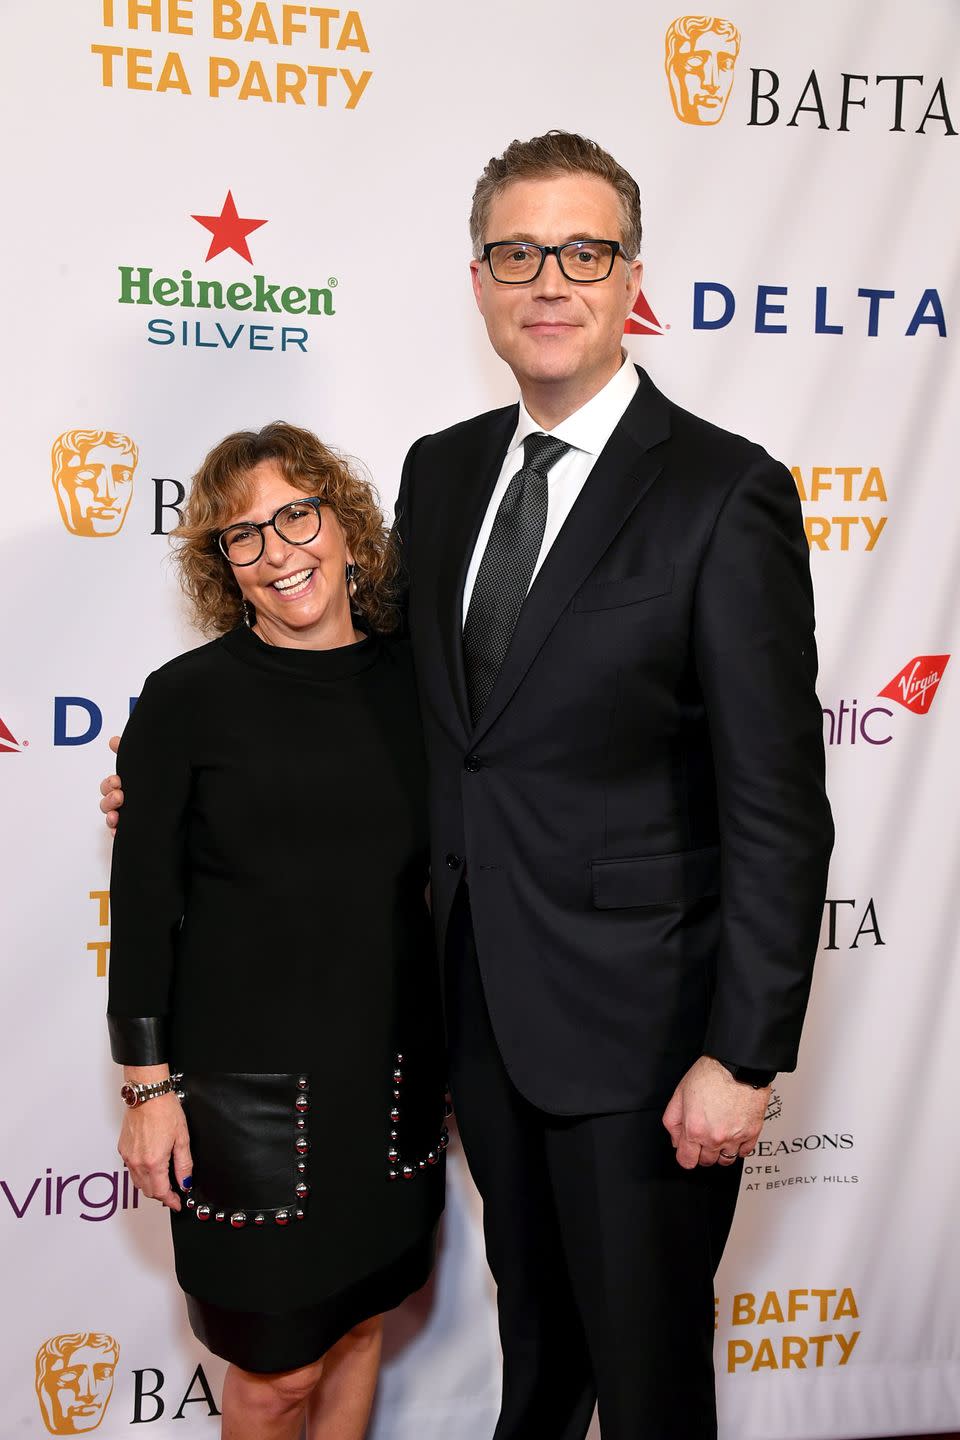 galyn susman and angus maclane attend the bafta tea party at four seasons hotel los angeles at beverly hills on january 14, 2023 in los angeles, california